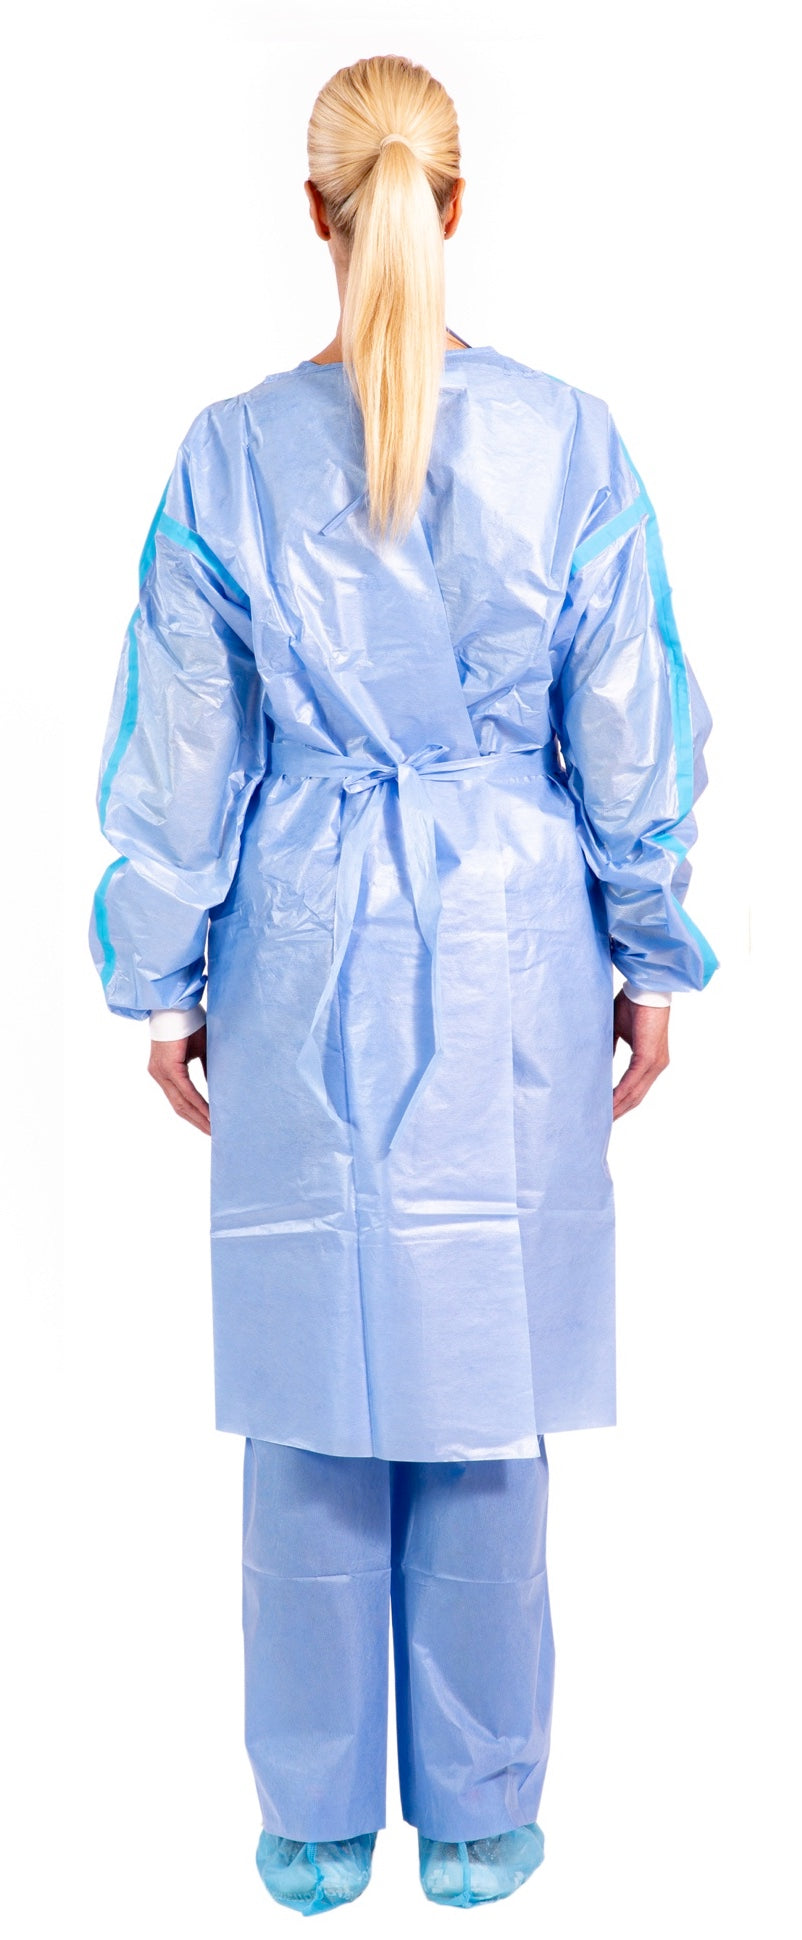 AAMI Level 3 Chemotherapy Gown